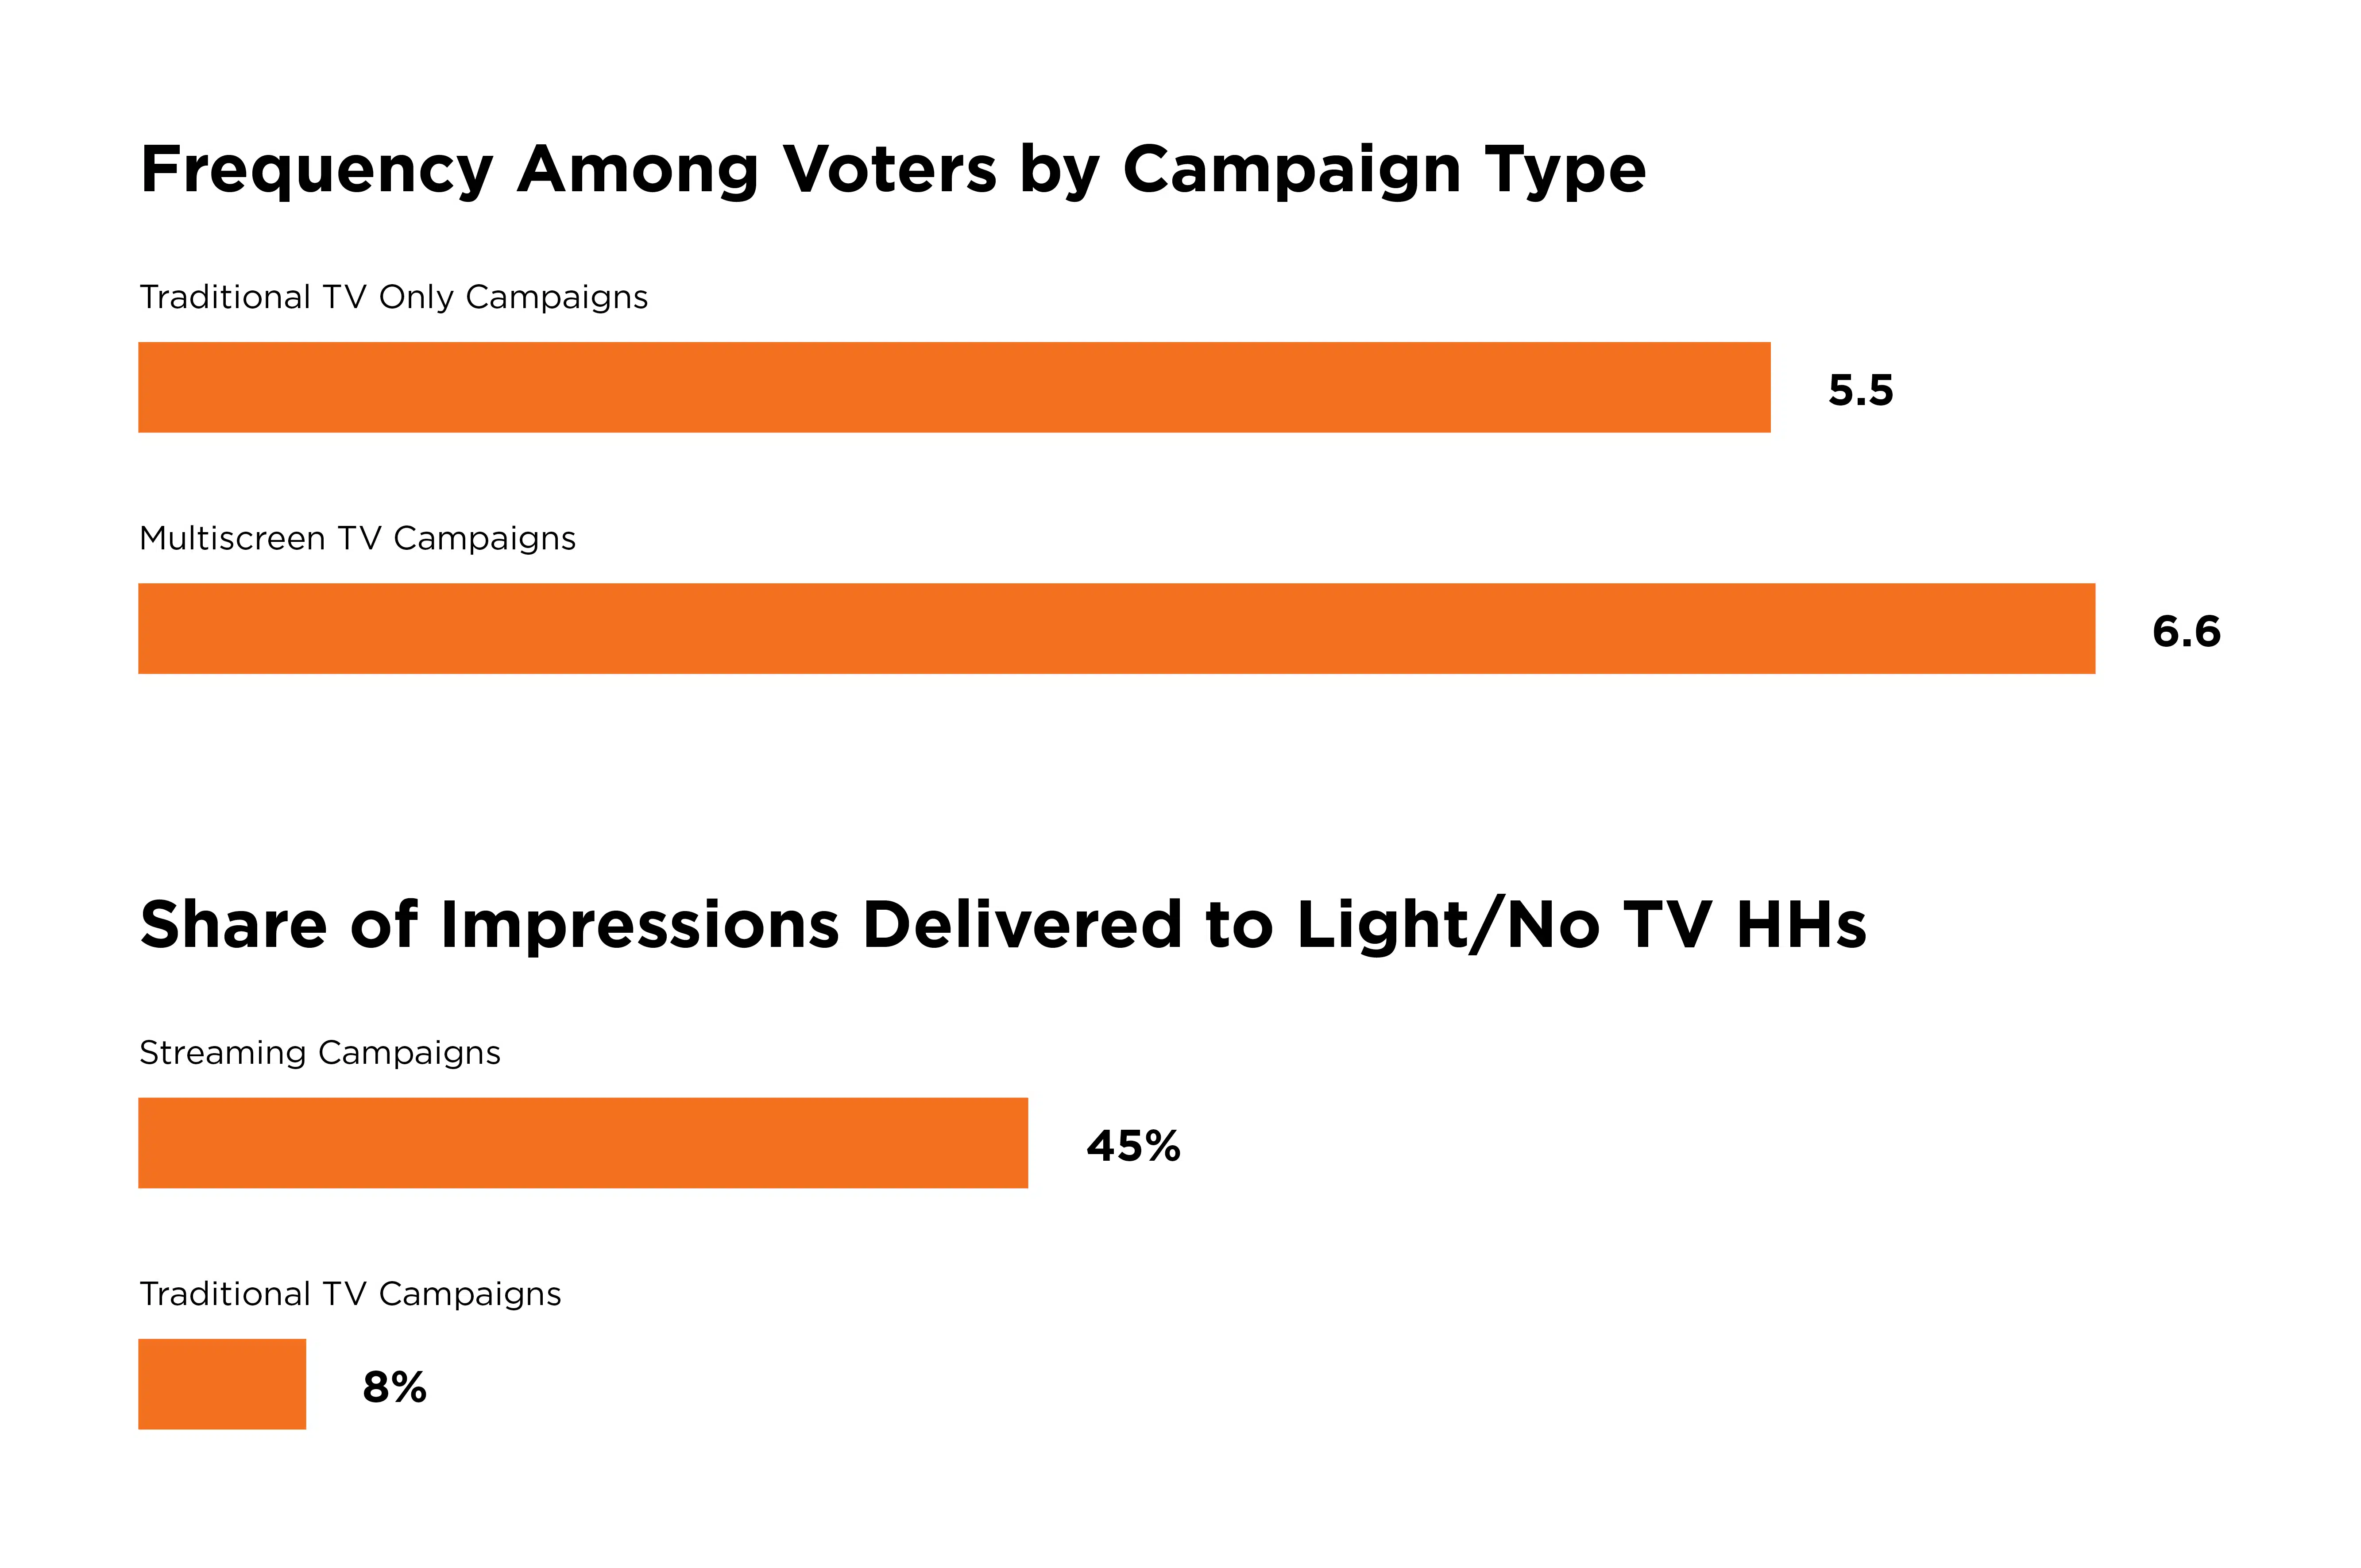 Two bar charts, the top chart shows frequency among voters by campaign type. Traditional TV only campaigns had a frequency of 5.5 and multiscreen TV campaigns had a frequency of 6.6. The bottom chart shows share of impressions delivered to light/no TV households, with streaming campaigns at 45%.